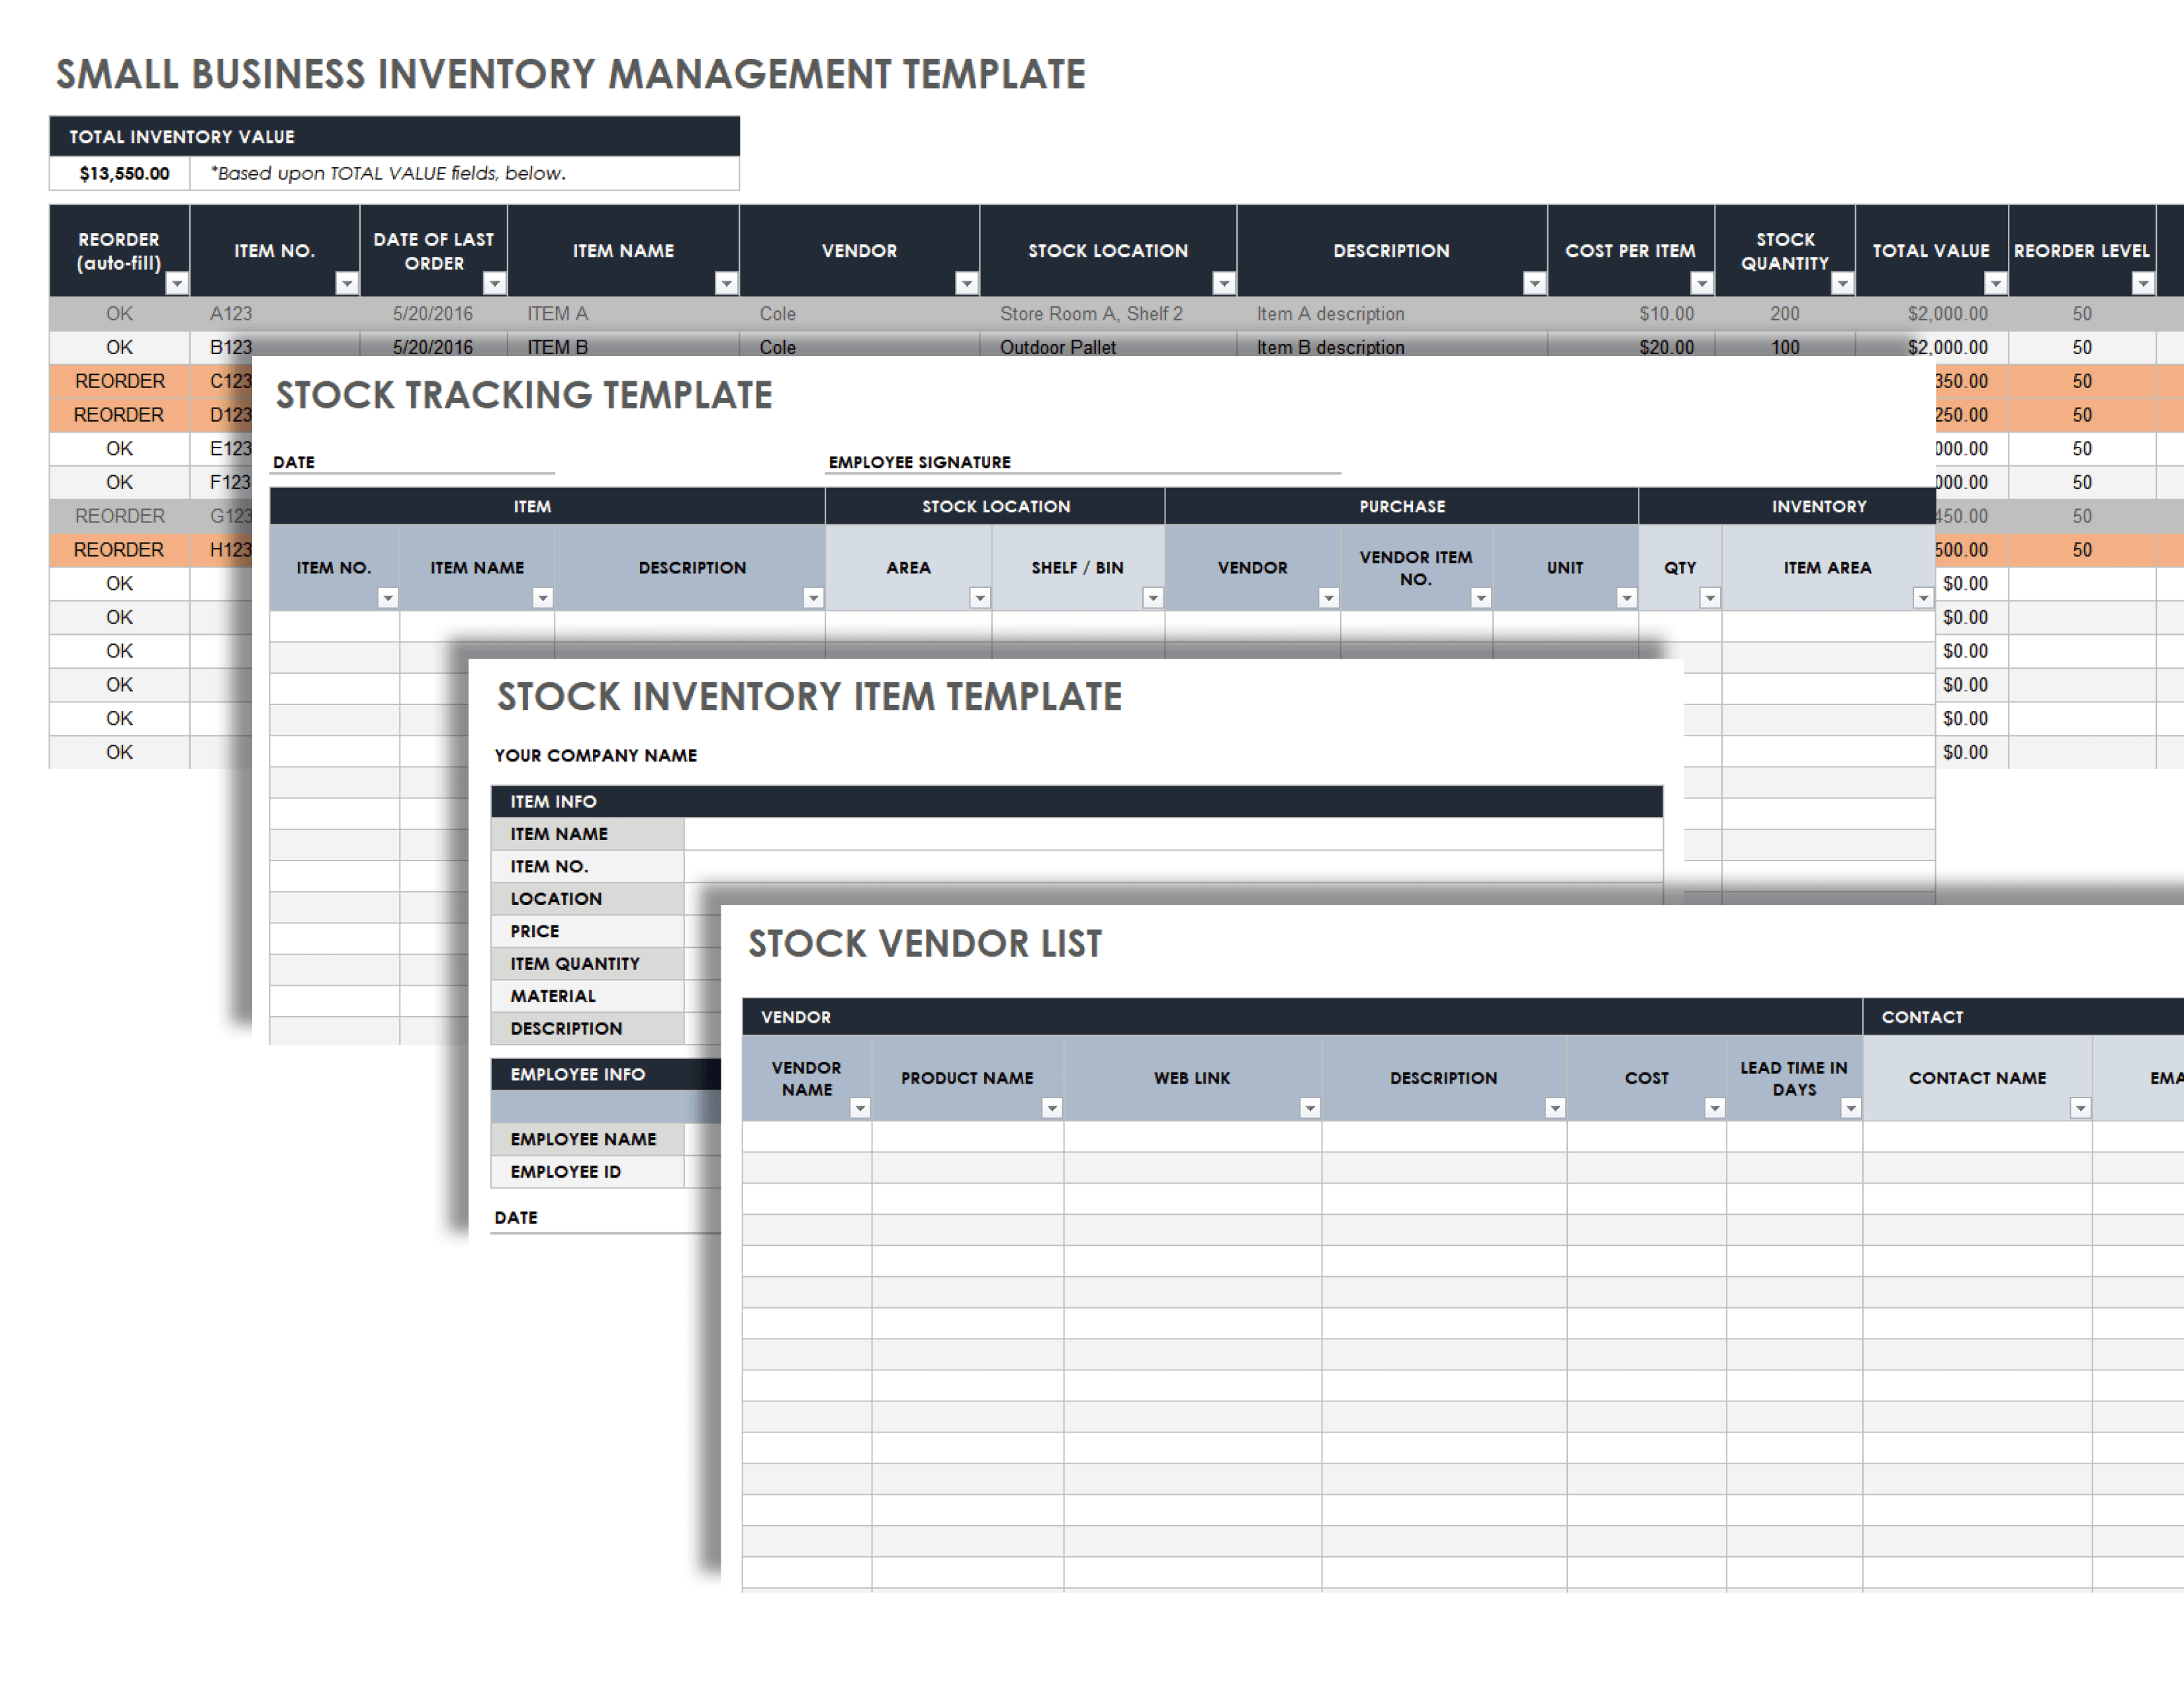 Small Business Inventory Management Template